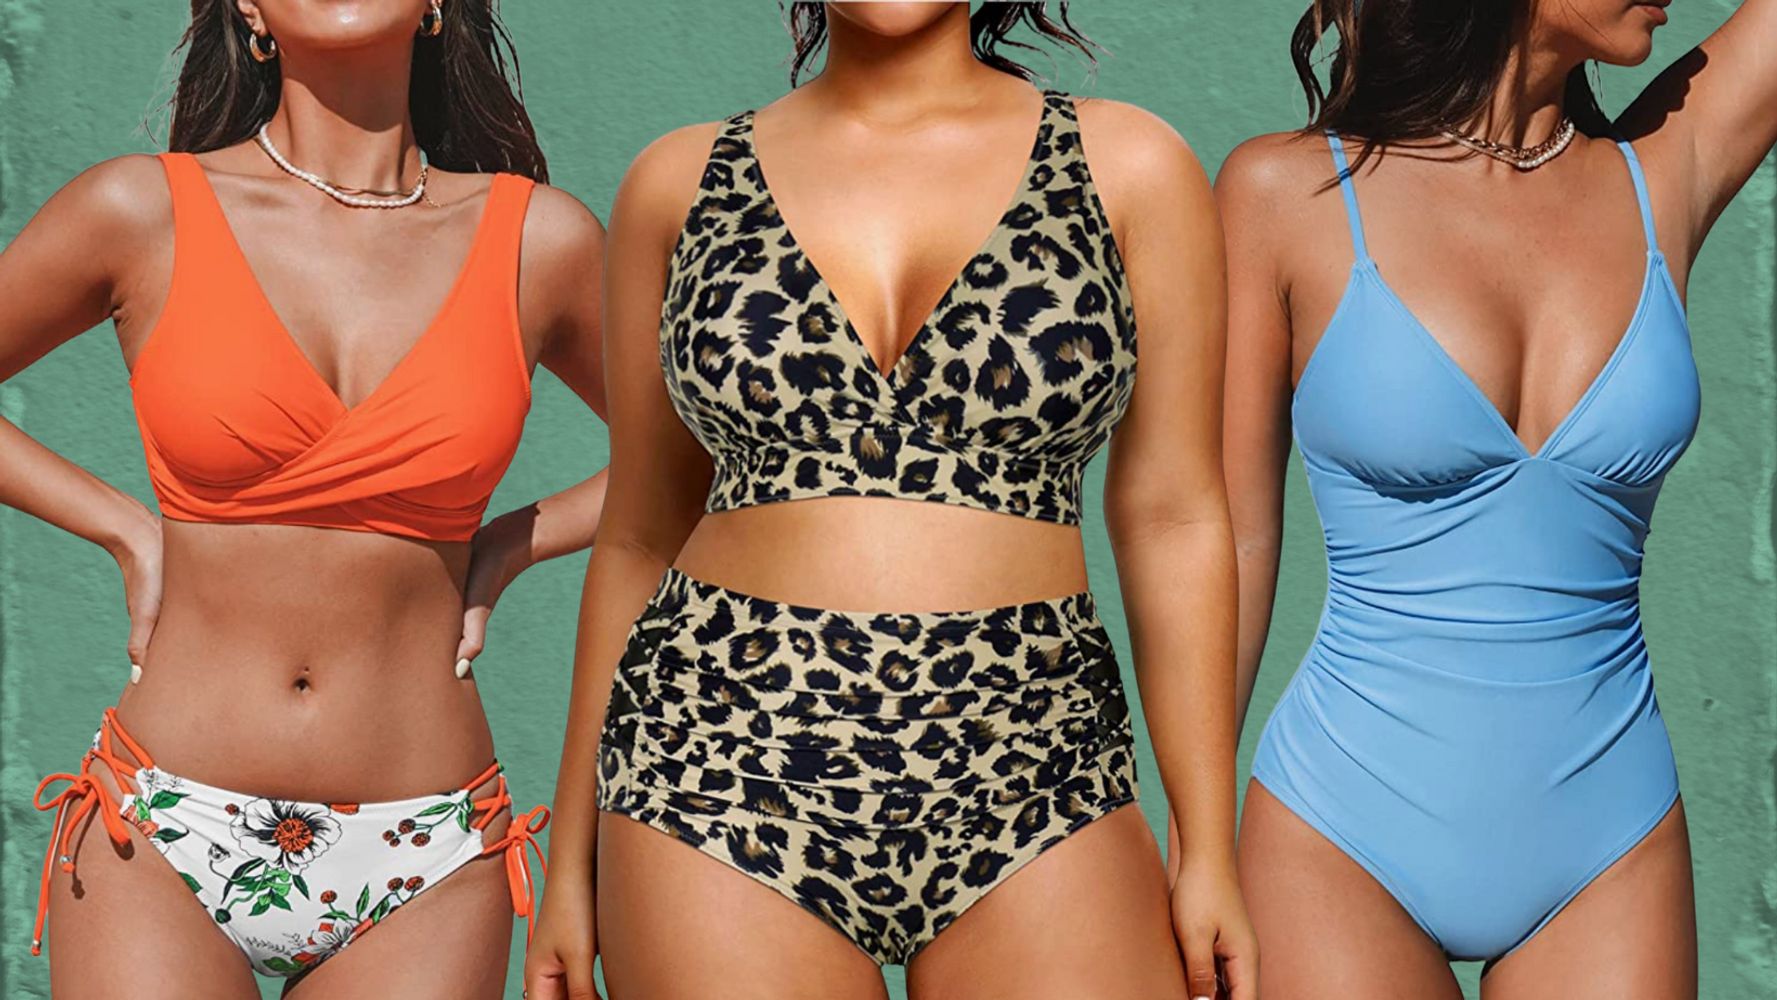 Halter swimsuit with contrast piping - Women's fashion